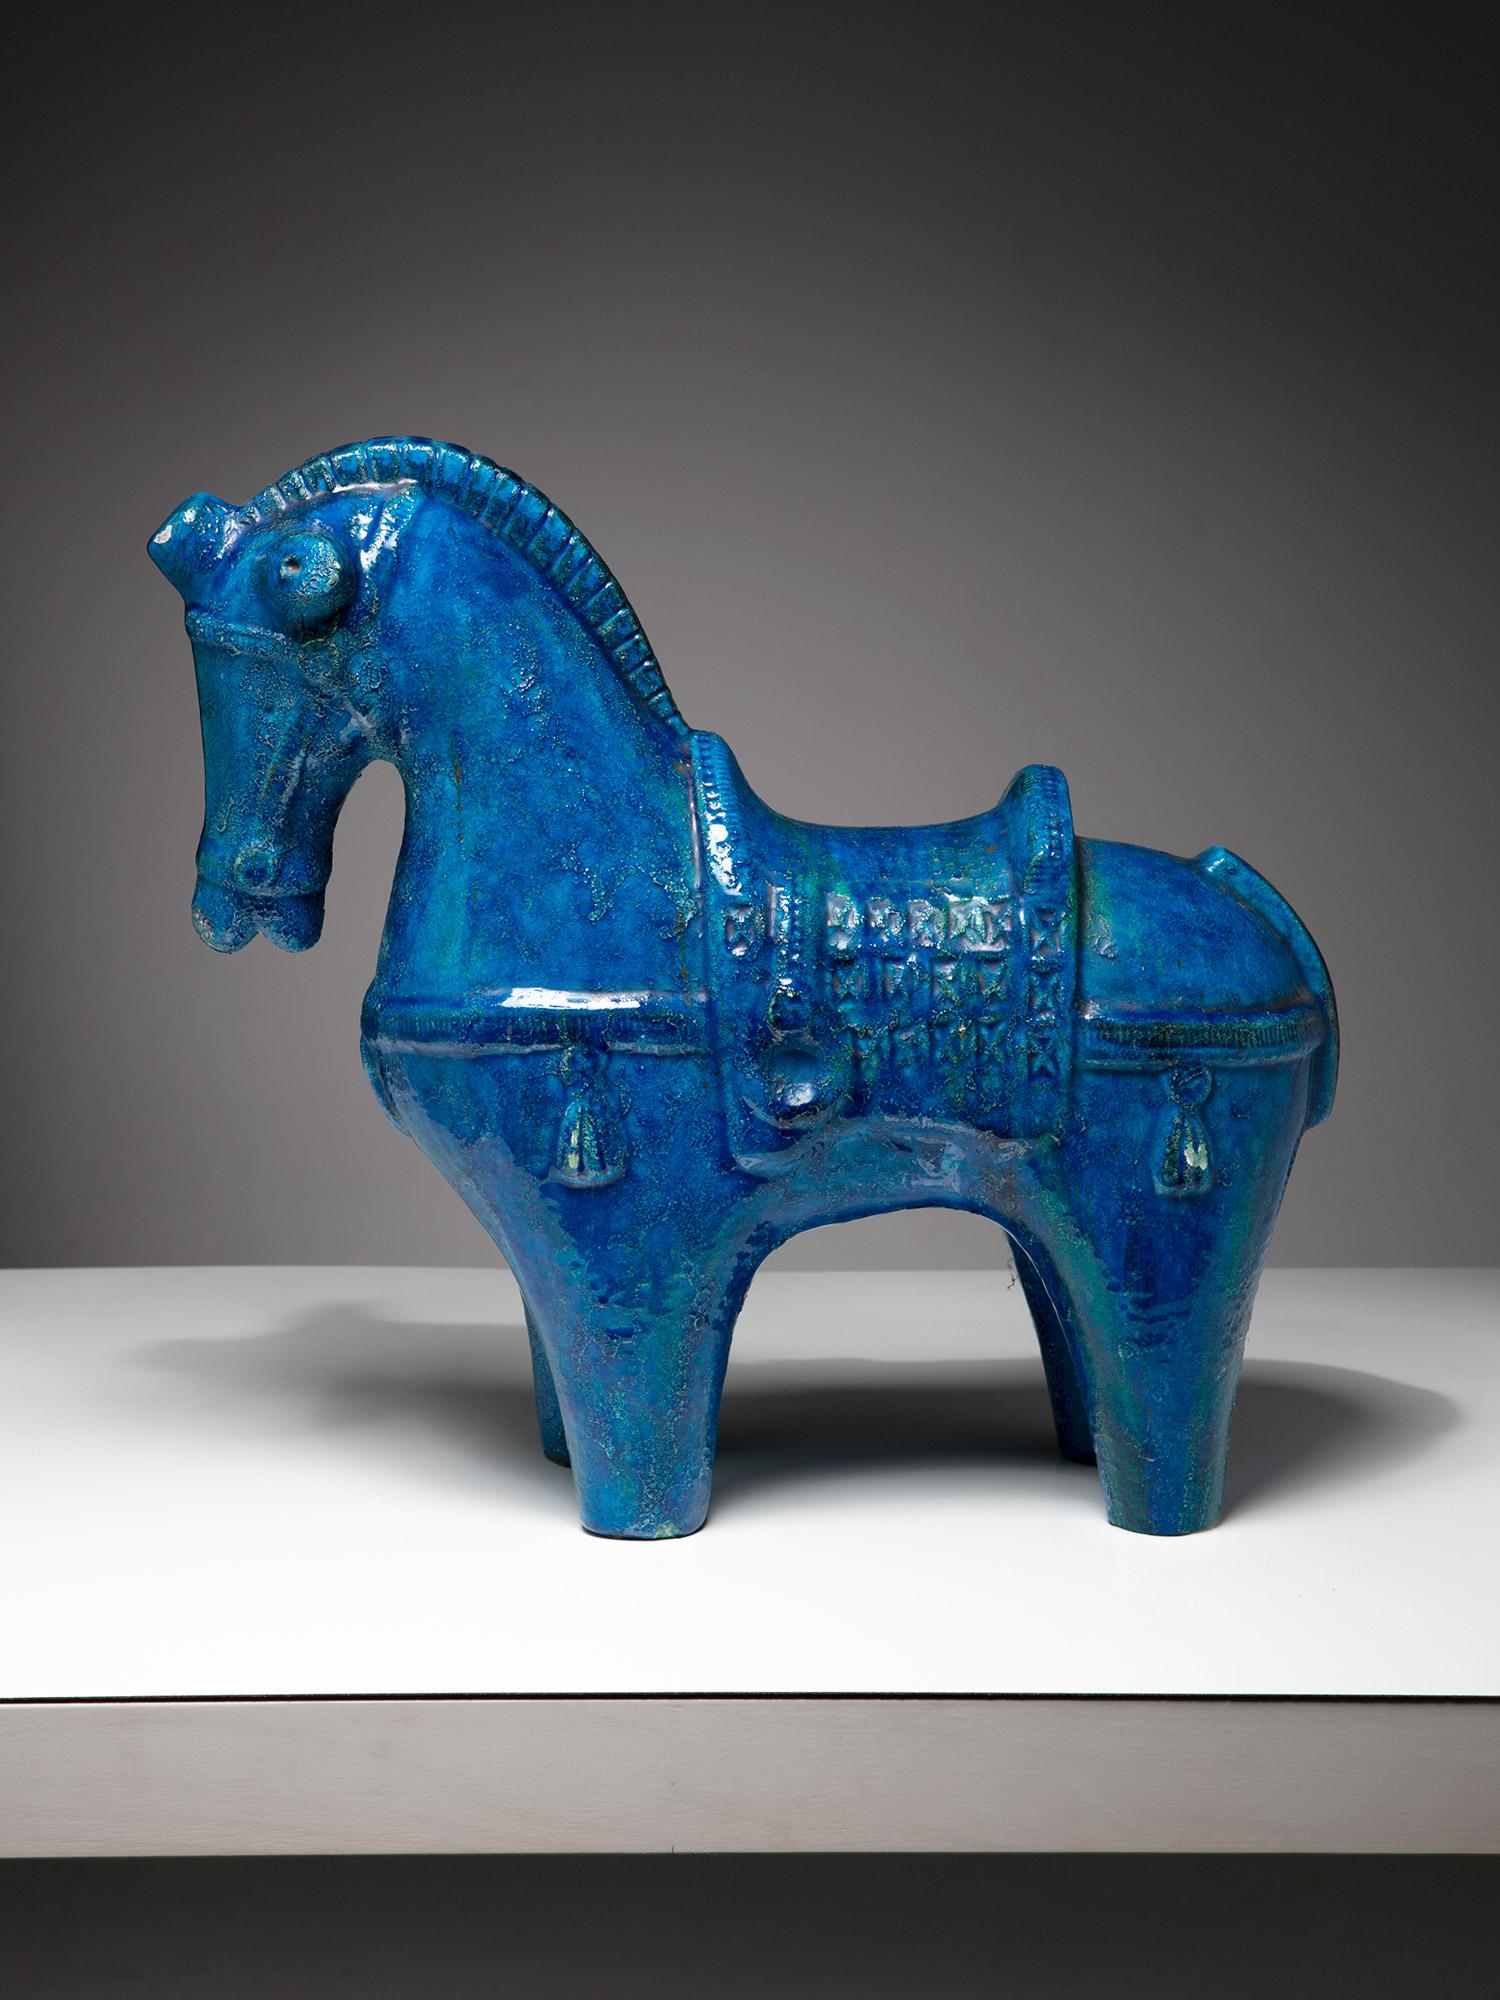 Ceramic standing horse sculpture by Aldo Londi for Bitossi.
Blue crystalline glaze enhancing the details of the decoration.
